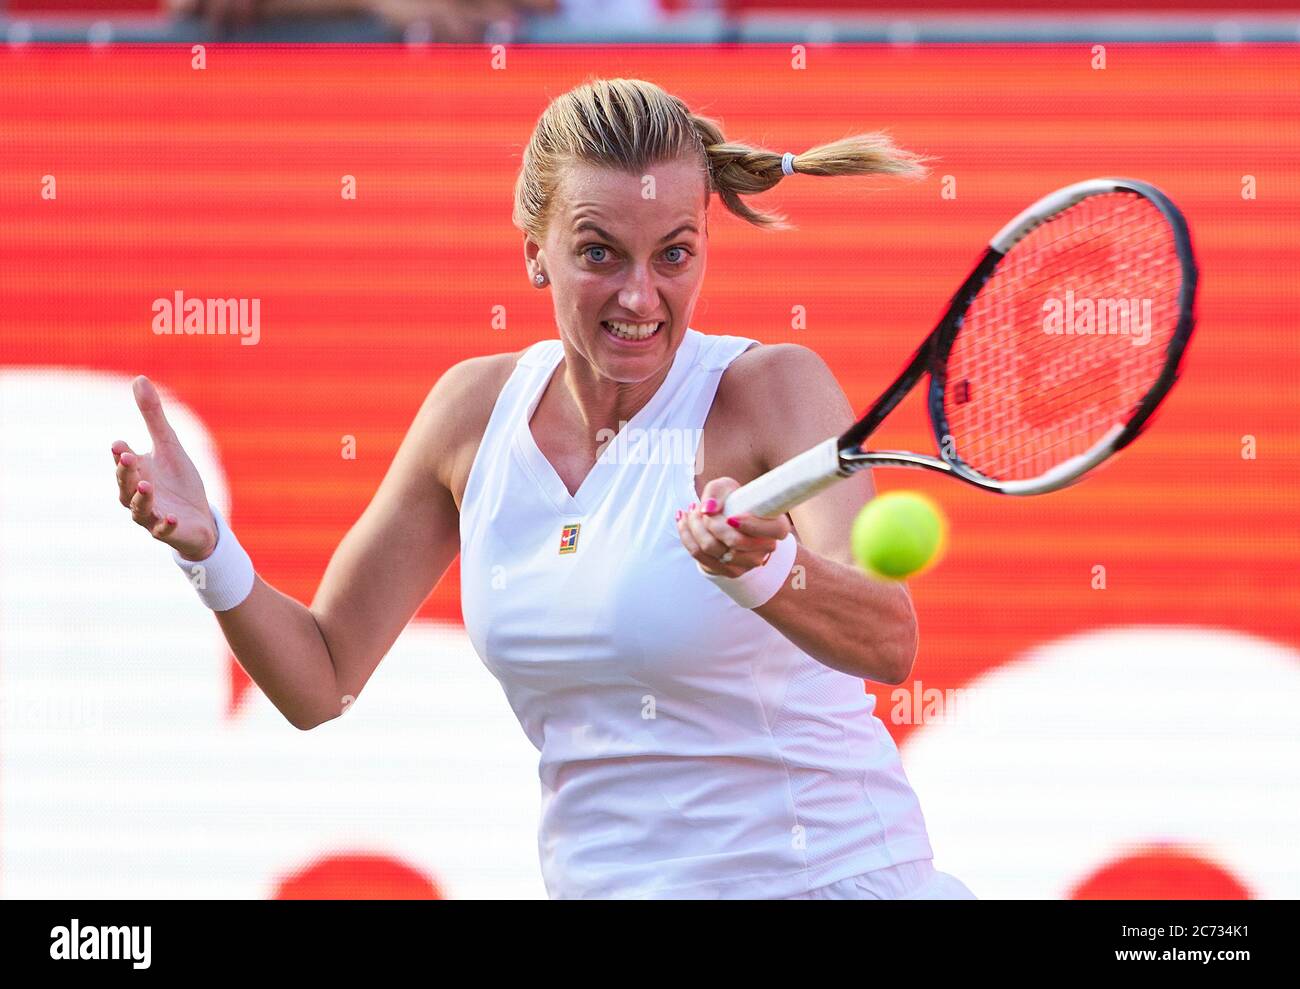 Berlin, Germany. 13th July, 2020. Petra KVITOVA (CZE) in her match against  Andrea PETKOVIC (GER) at the Tennis bett1 ACES Tennis Tournament on grass  in Berlin , July 13, 2020. © Peter